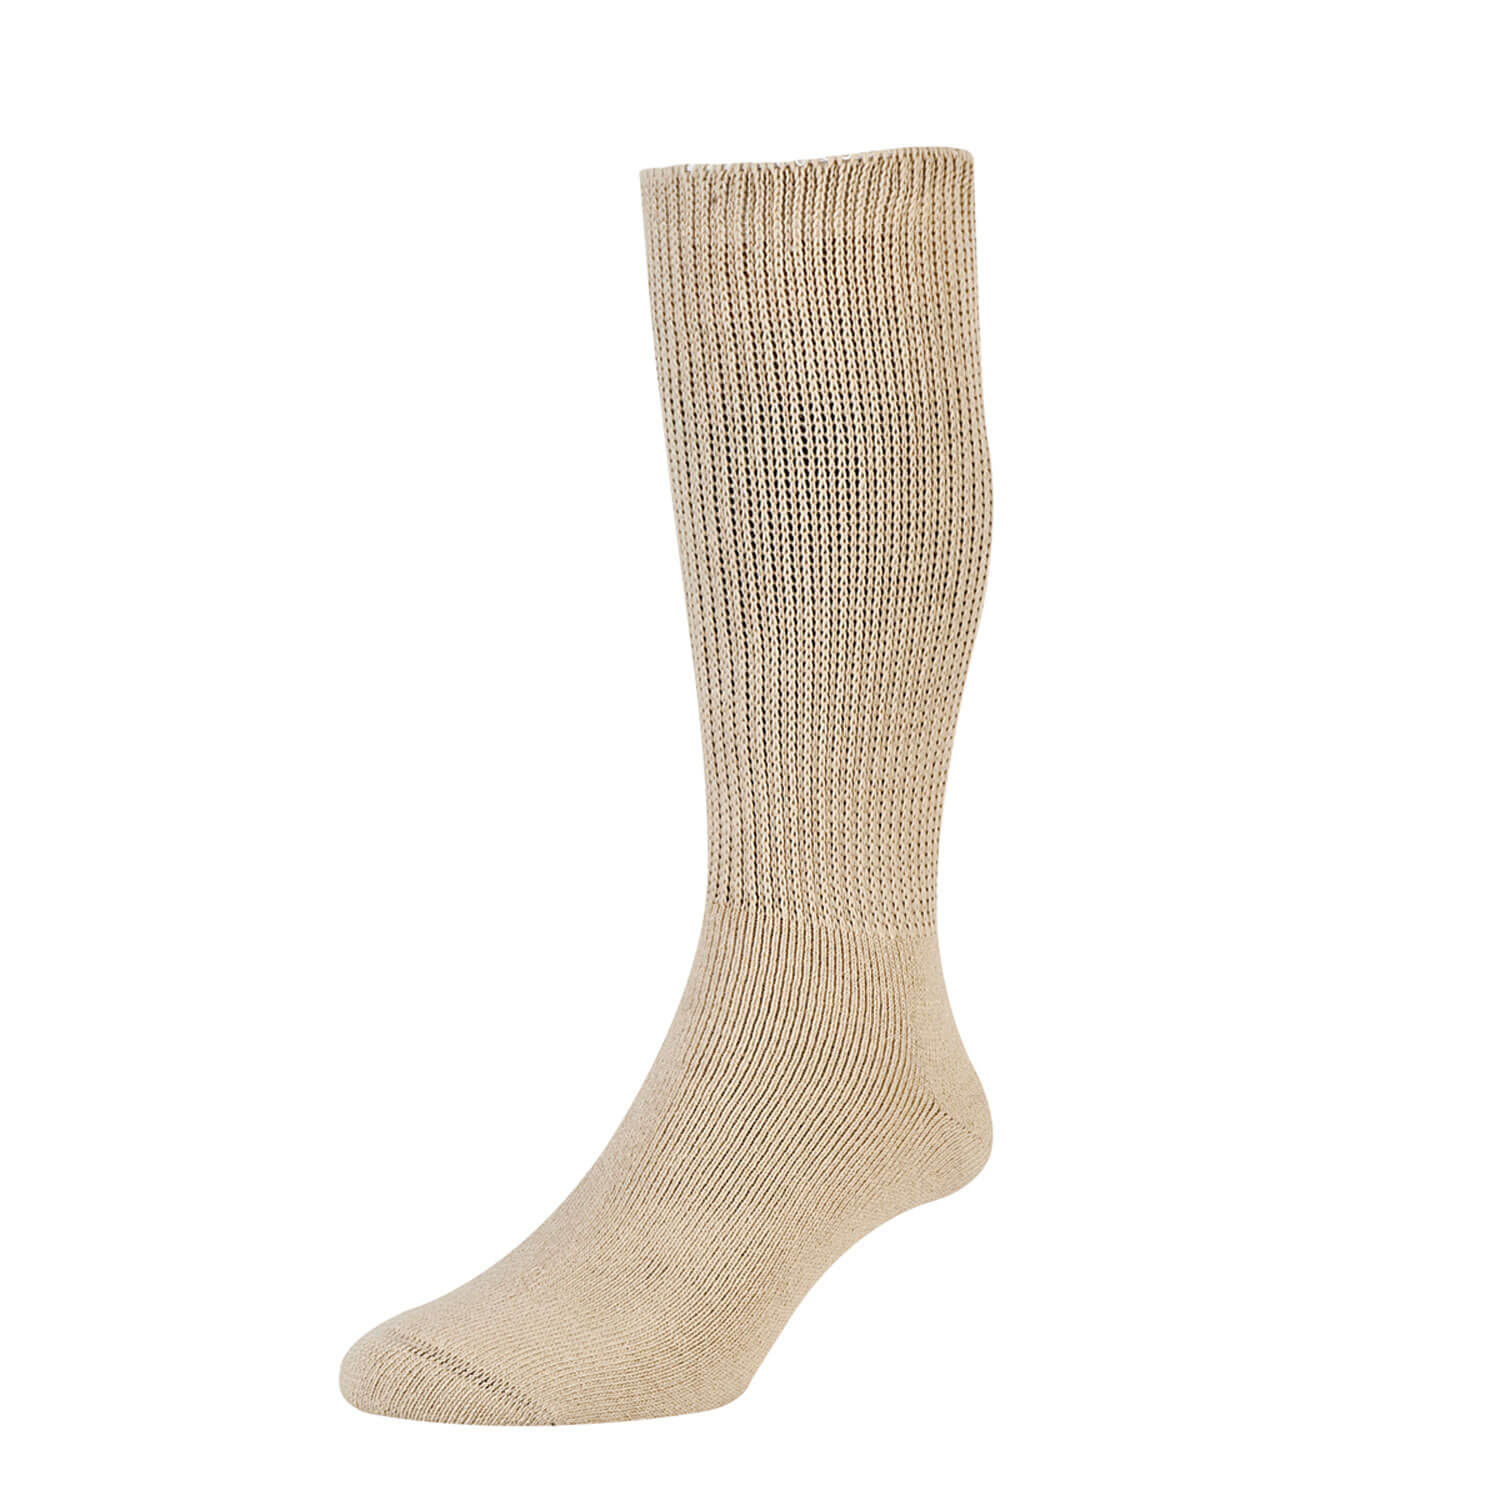 Hj Hall Cotton Diabetic Socks - Oatmeal 1 Shaws Department Stores